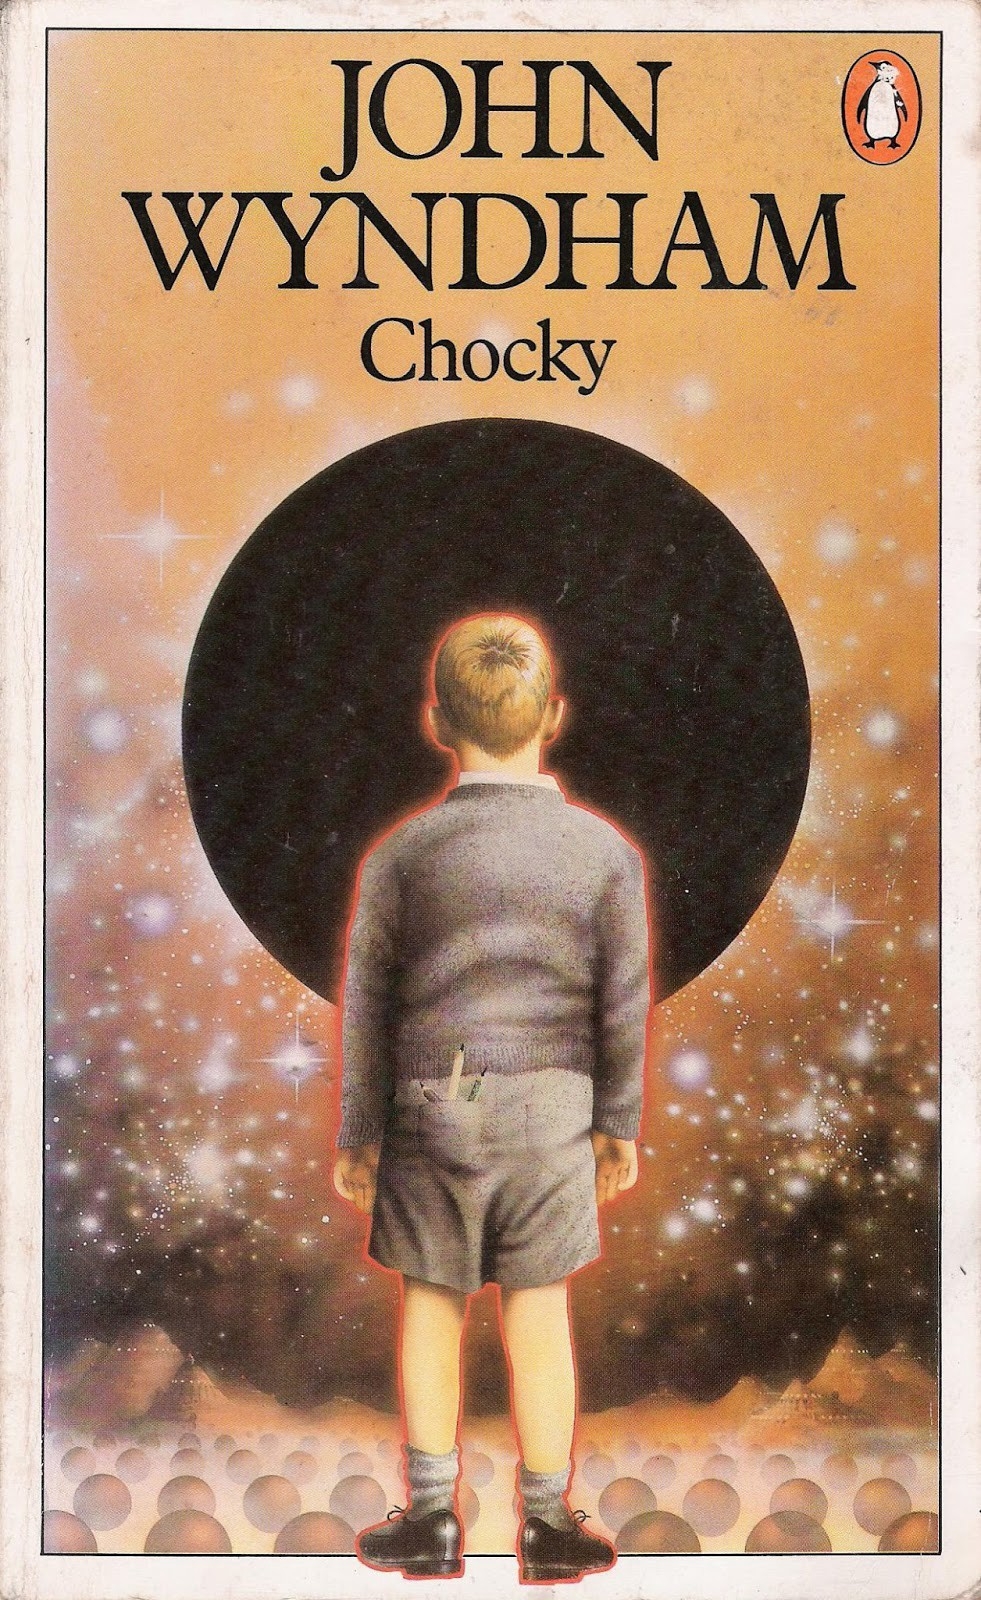 Cover of the book 'Chocky' featuring an illustration of a child looking towards a large black hole in space.